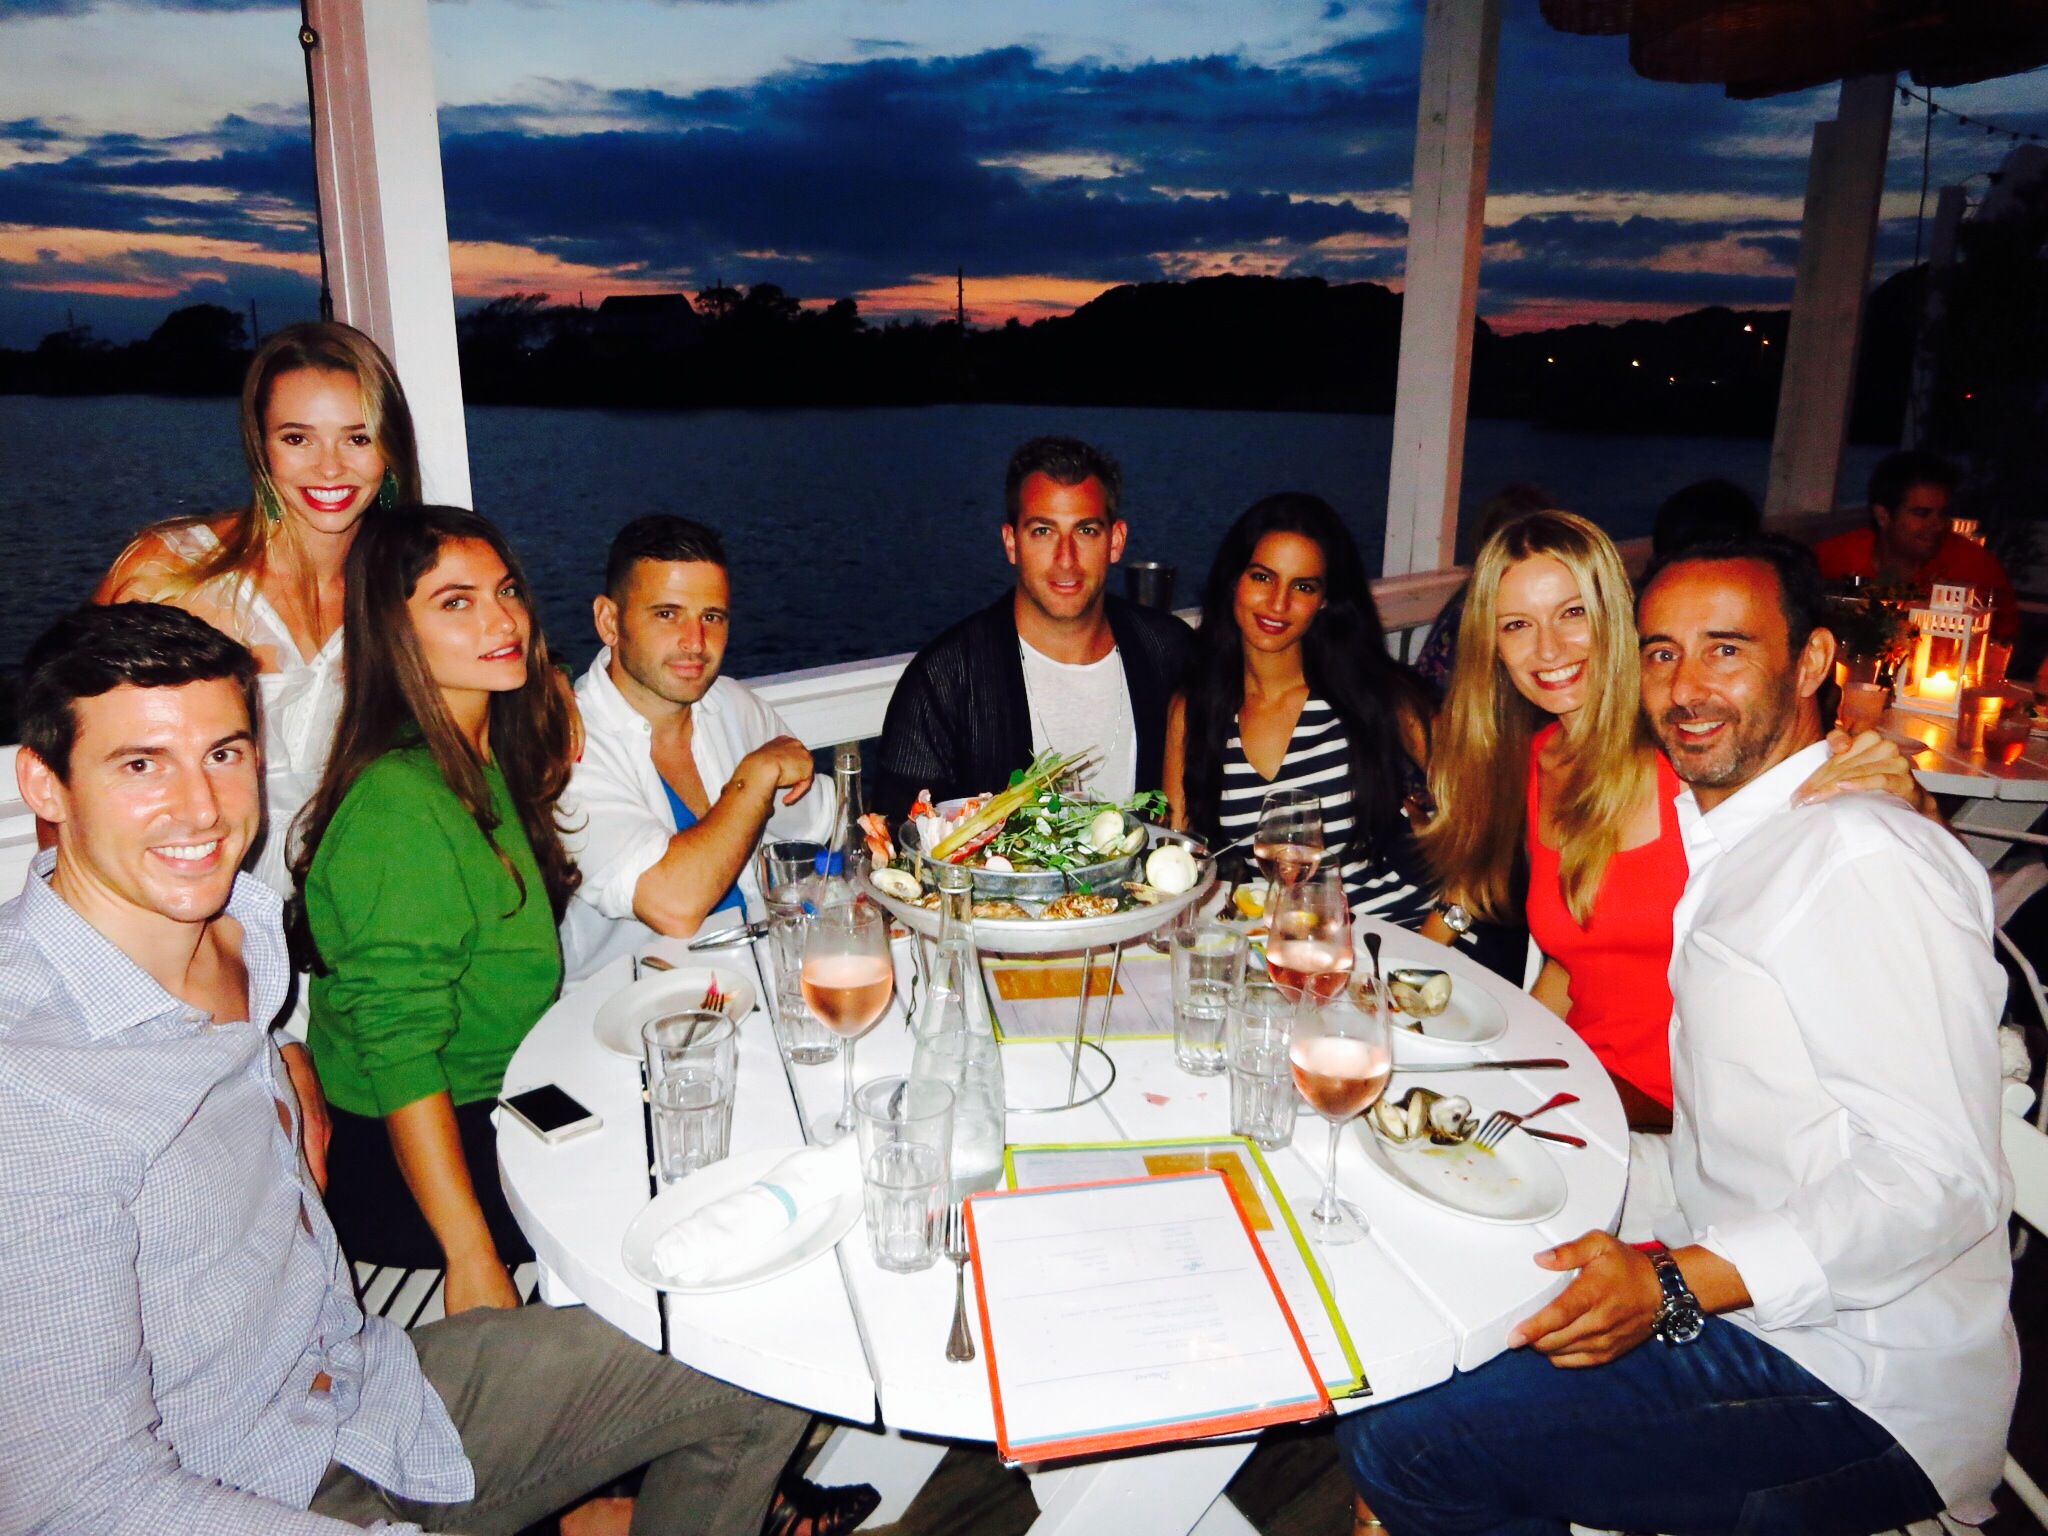 "Amazing dinner with the best company @thesurflodgemtk in Montauk. 